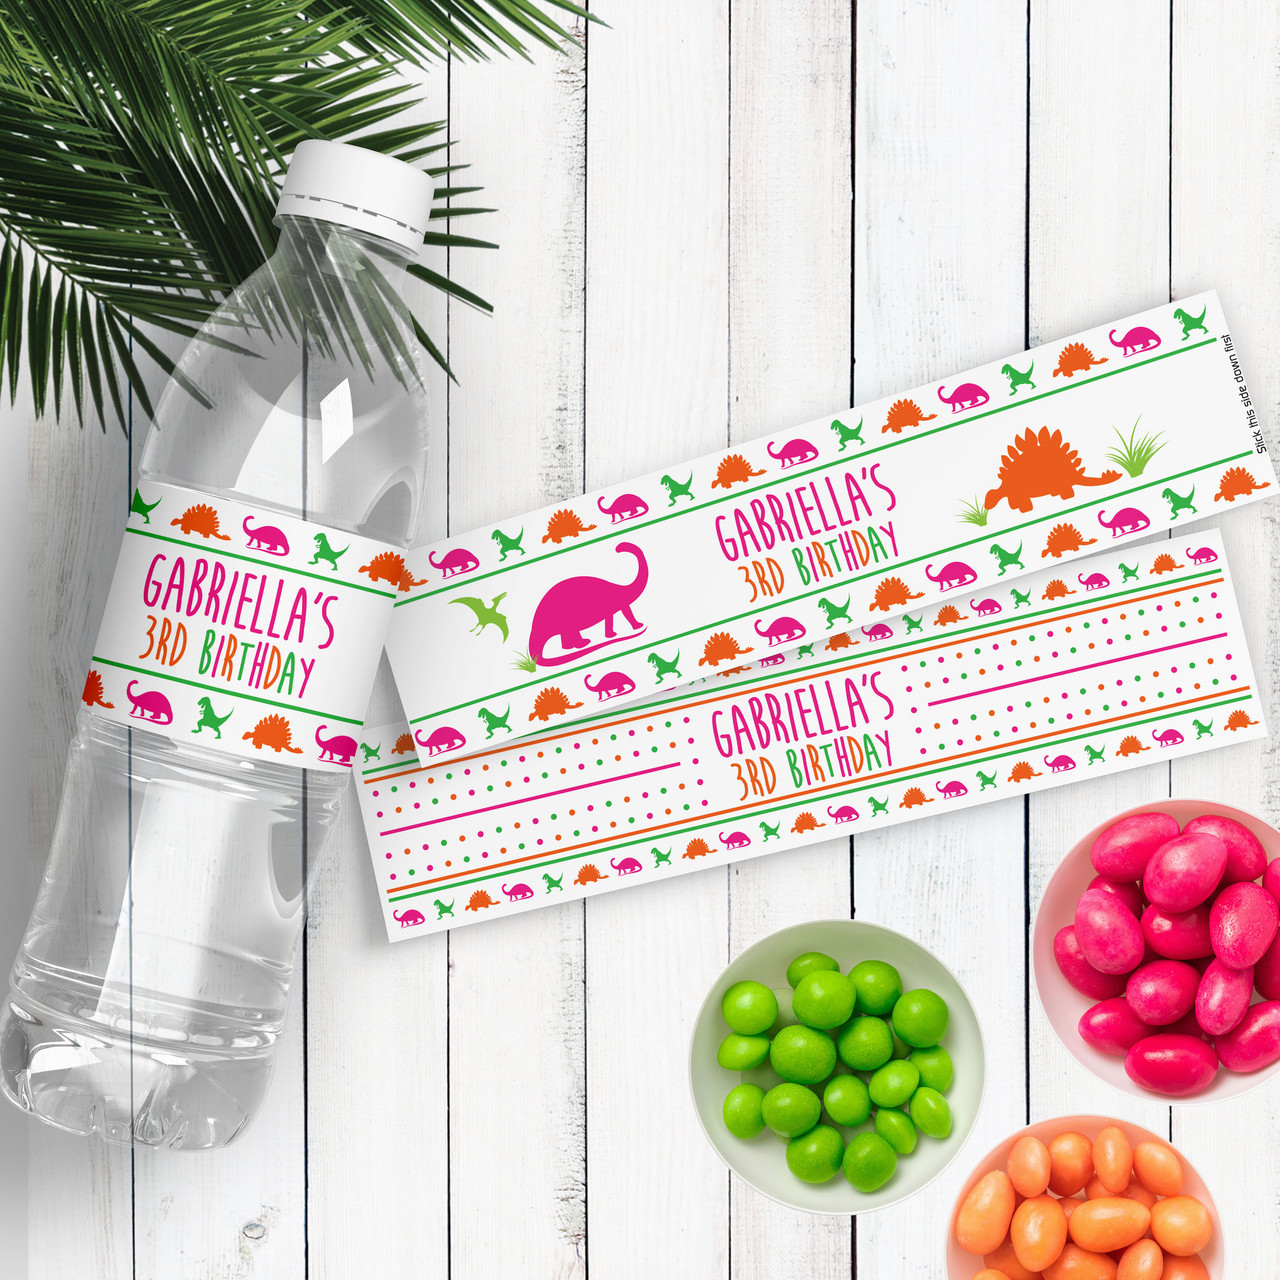 https://cdn11.bigcommerce.com/s-5grzuu6/images/stencil/1280x1280/products/3264/44534/Dinosaur_Pink_Girls_Birthday_Personalized_Water-Bottle-Stickers__69636.1639160615.jpg?c=2